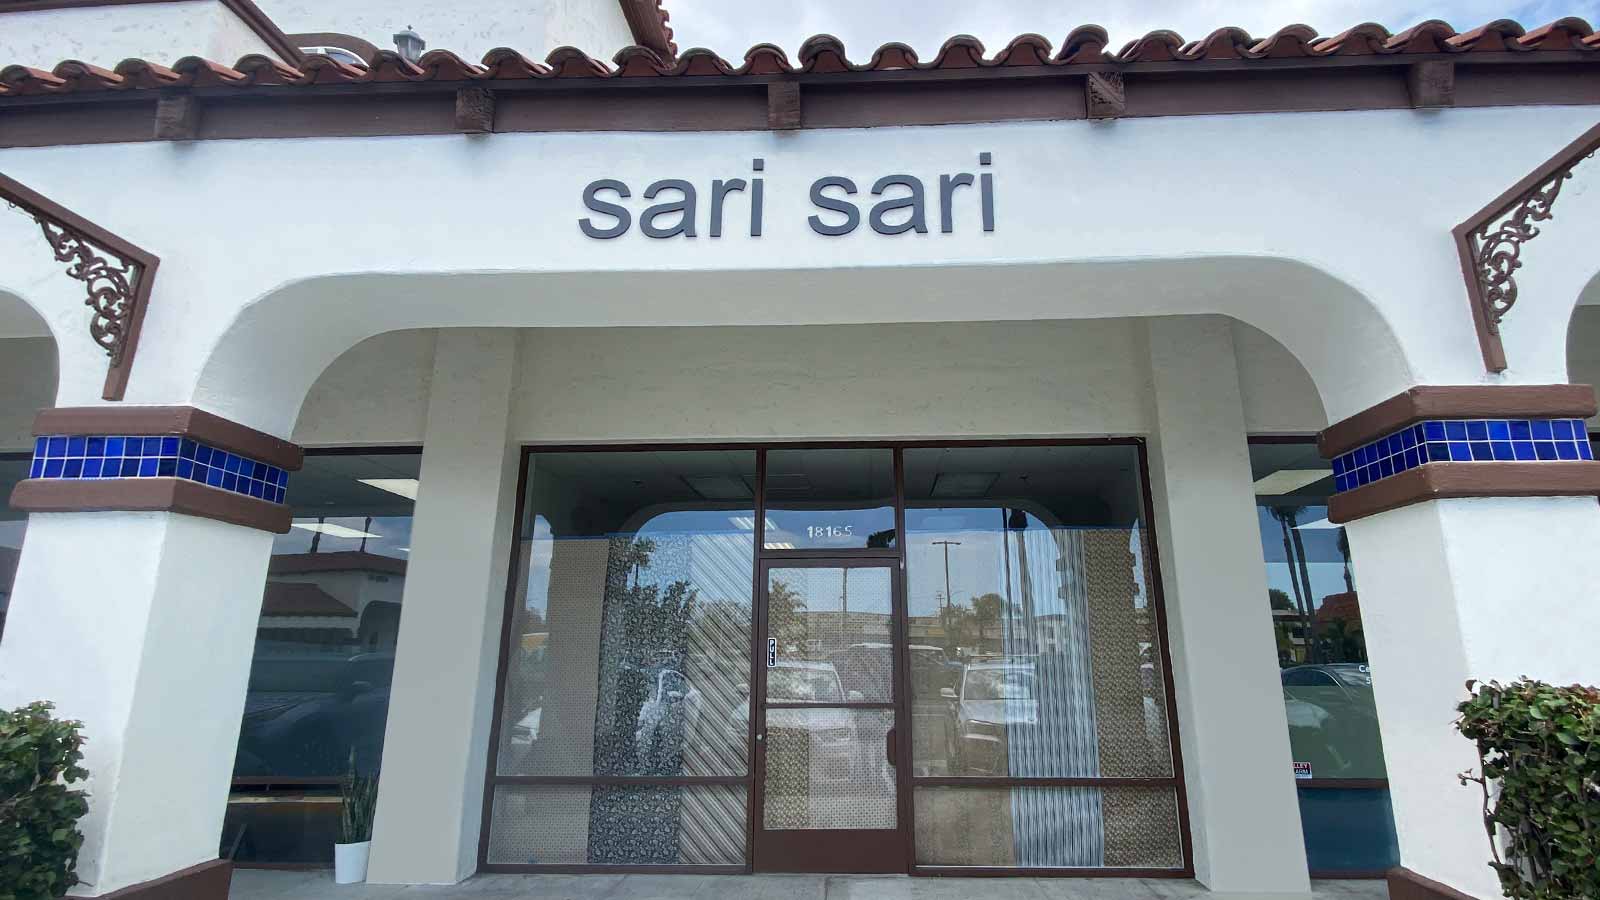 sari sari store sign installed on the outdoor wall